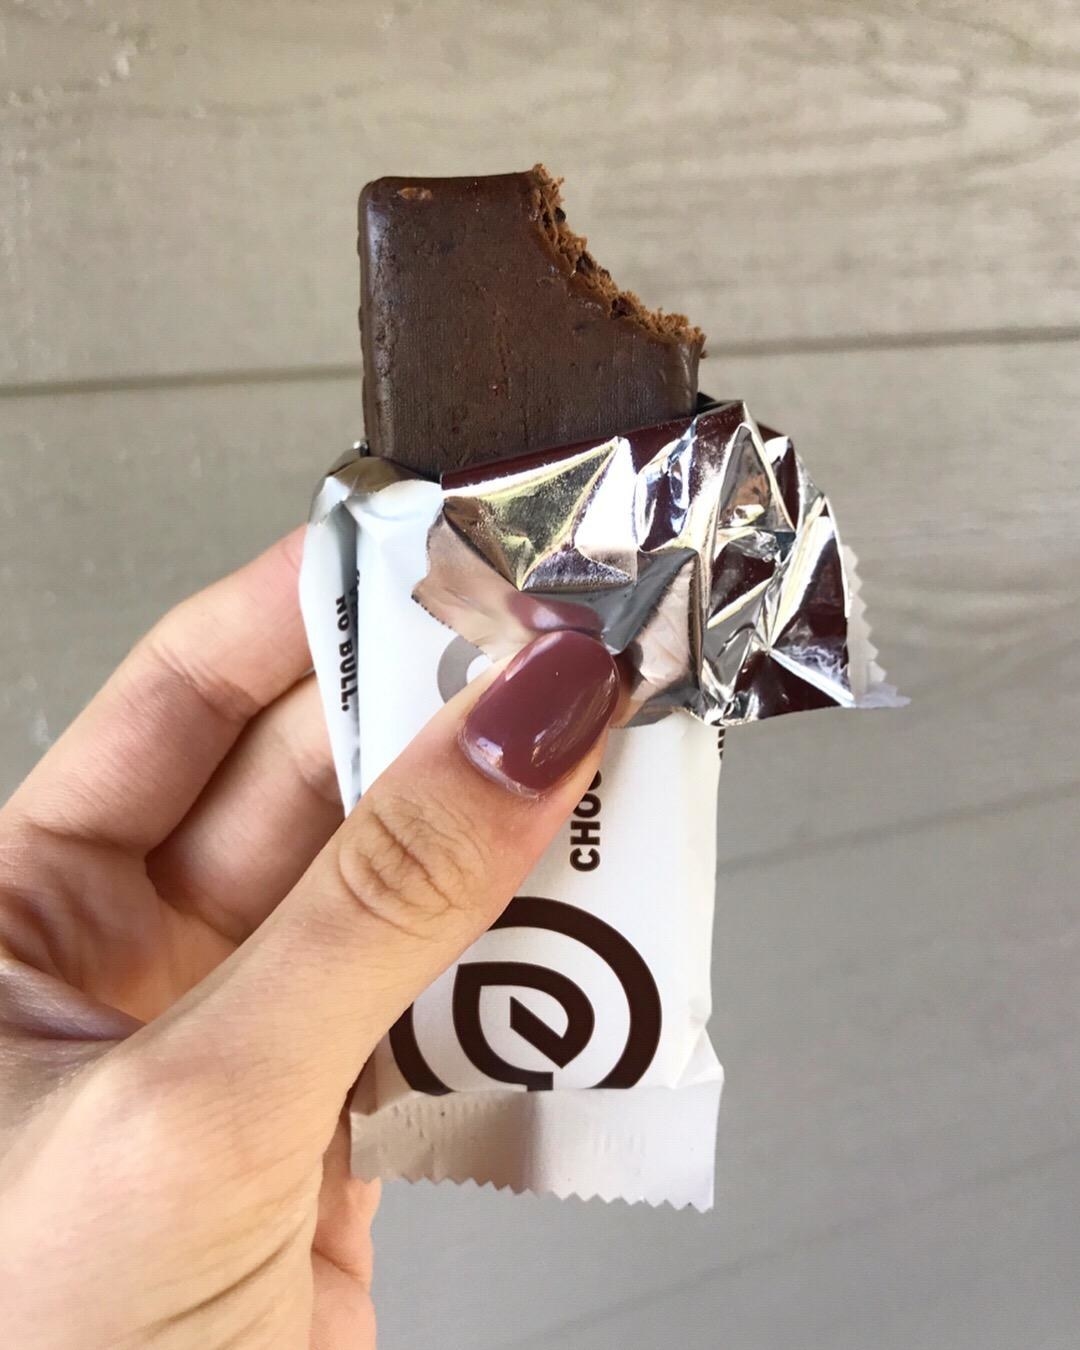 A person holding a protein bar